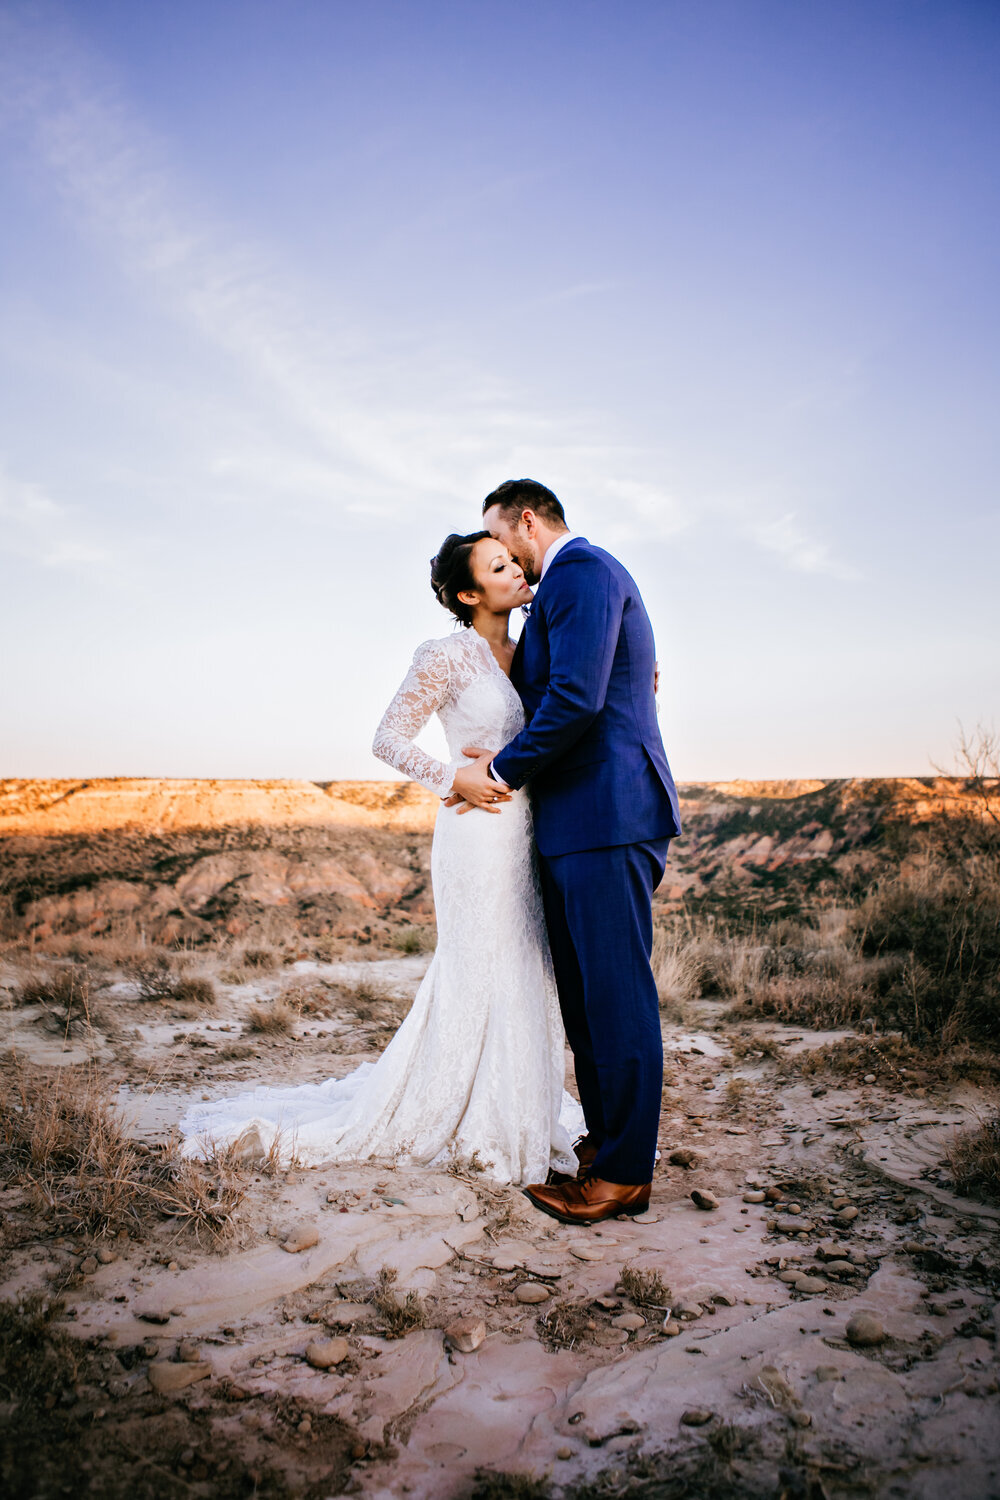  The bride’s gorgeous dress seemed to have lace that extended all the way to the edge fo this photo as the groom kisses her sweetly on the cheek #tealawardphotography #texasweddings #amarillophotographer #amarilloweddingphotographer #emotionalphotography #intimateweddingphotography #weddingday #weddingphotos #texasphotographer #inspiredwedding #intimatewedding #weddingformals #bigday #portraits 